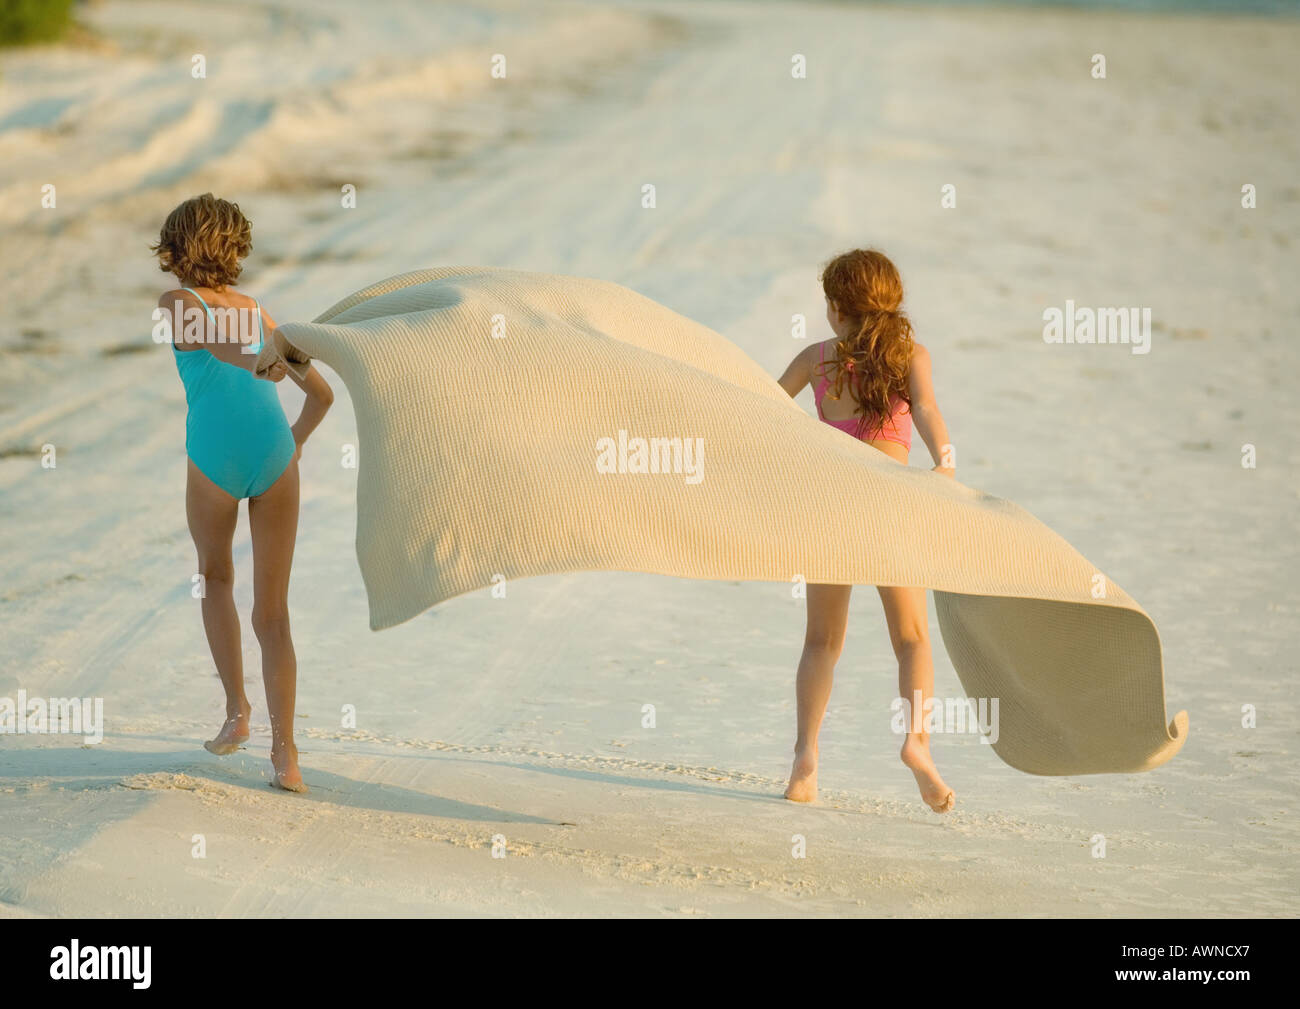 Two Girls Running On Beach Holding Blanket Out In Wind